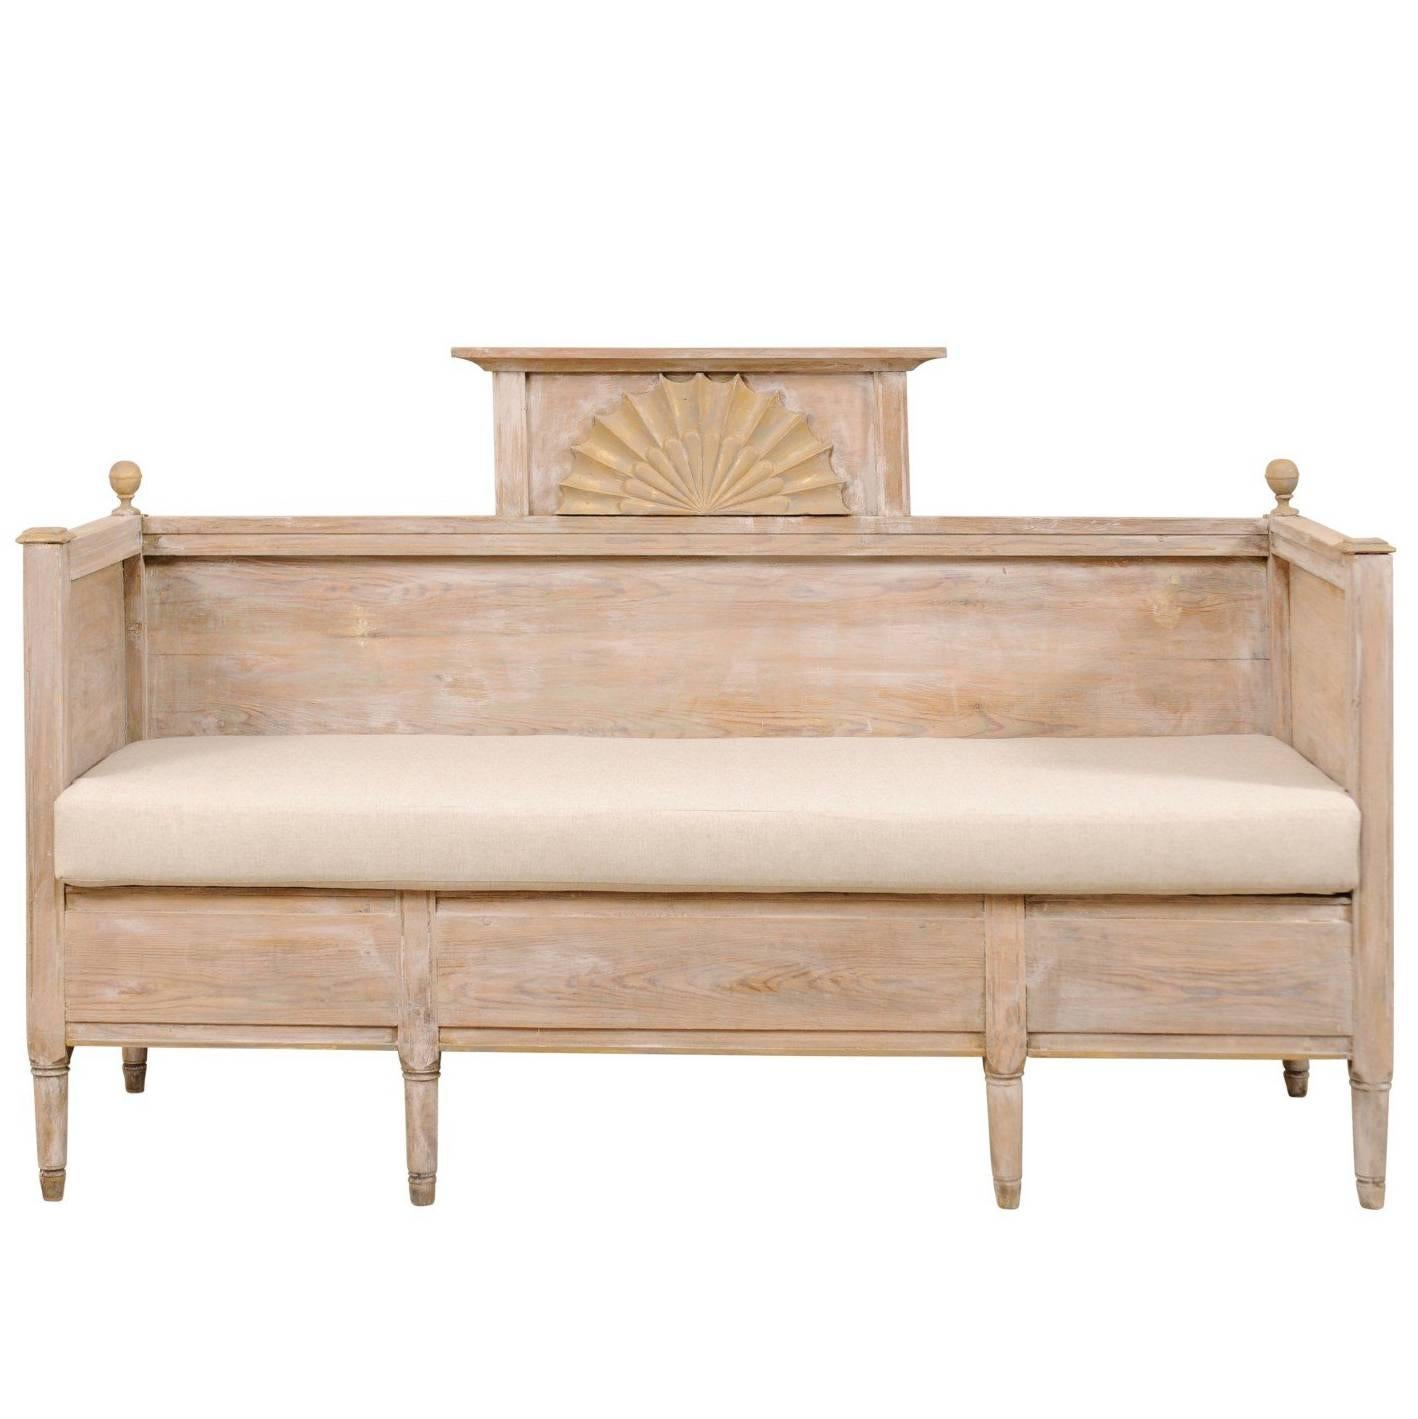 Early 19th C. Swedish Wooden Sofa Bench w/ Fan-Carved Pediment & Finial Accents